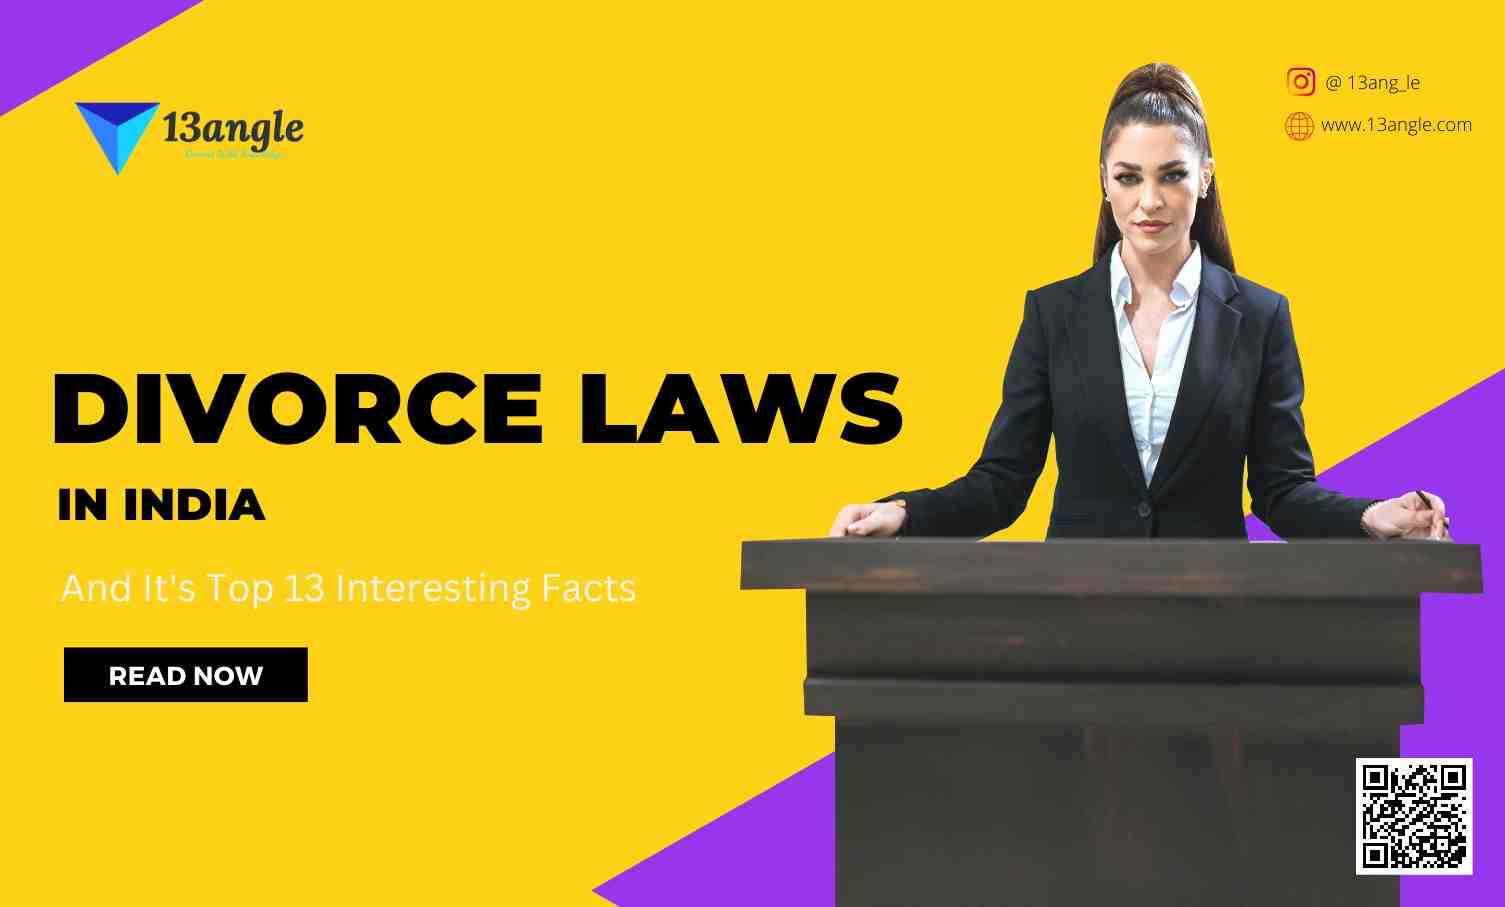 Divorce Laws In India- 13angle.com